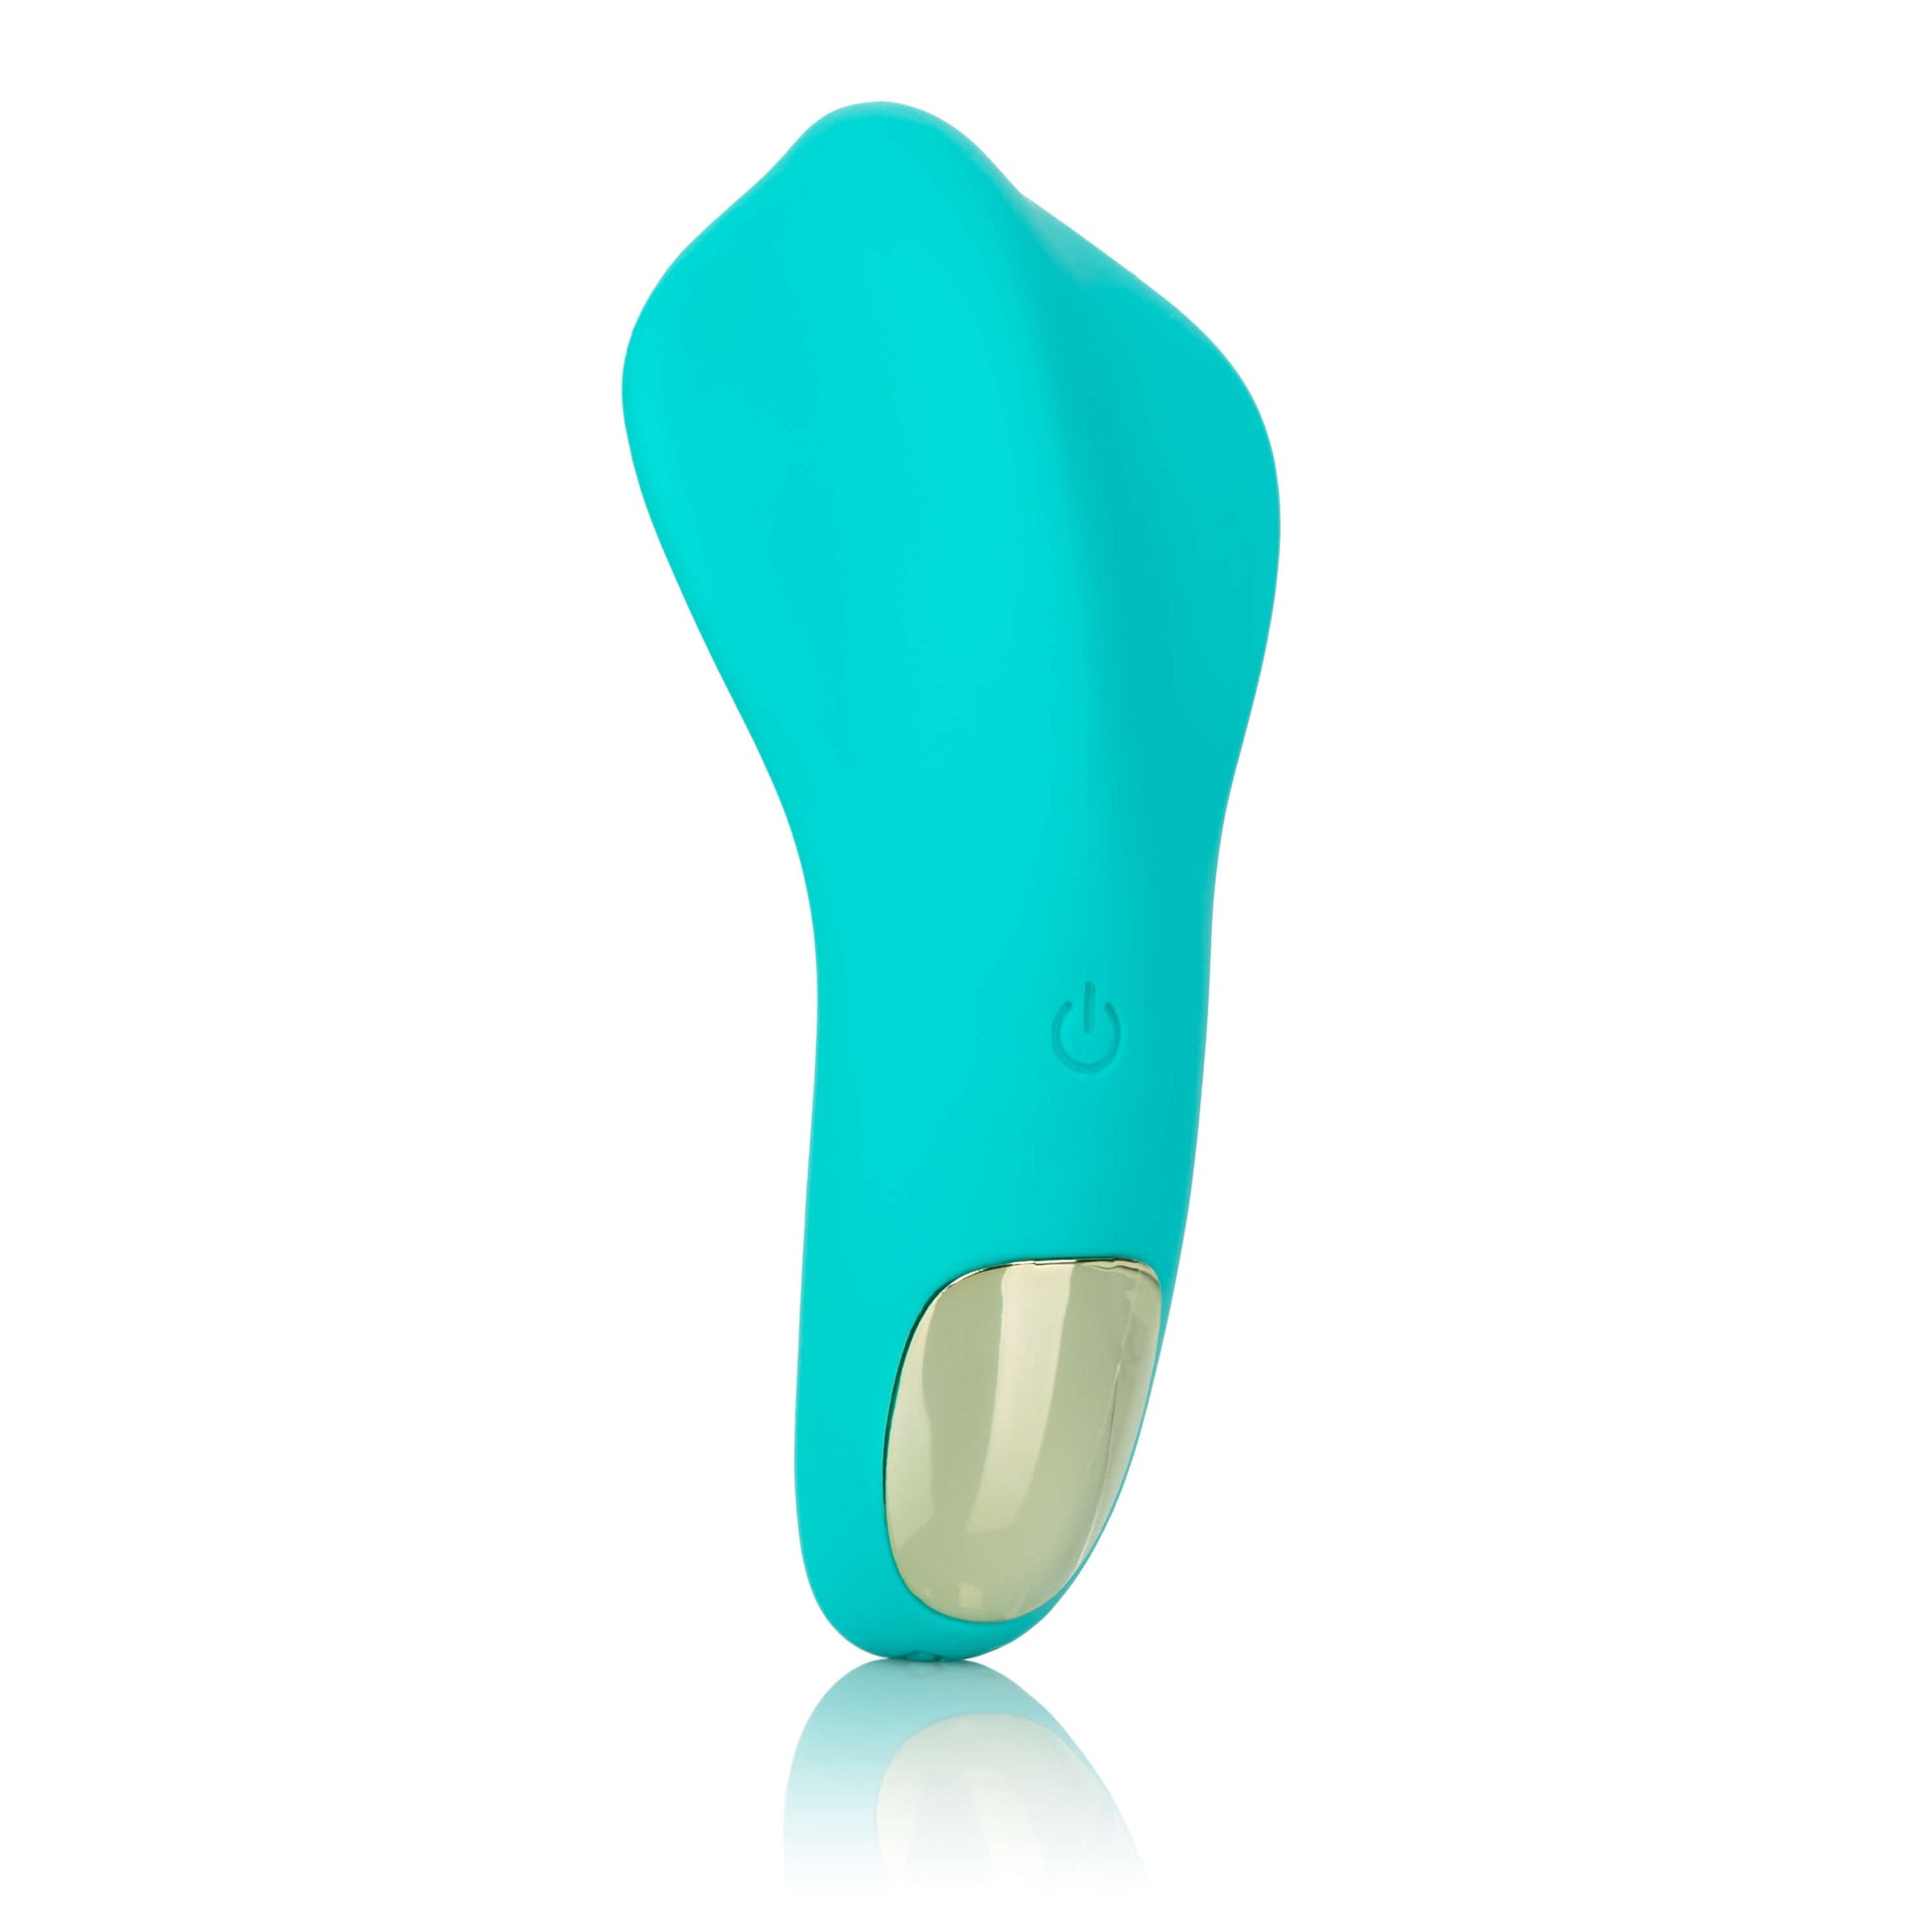 Slay Pleaser Vibrator - CalExotics - by The Bigger O  - an online sex toy shop. We ship to USA, Canada and the UK.